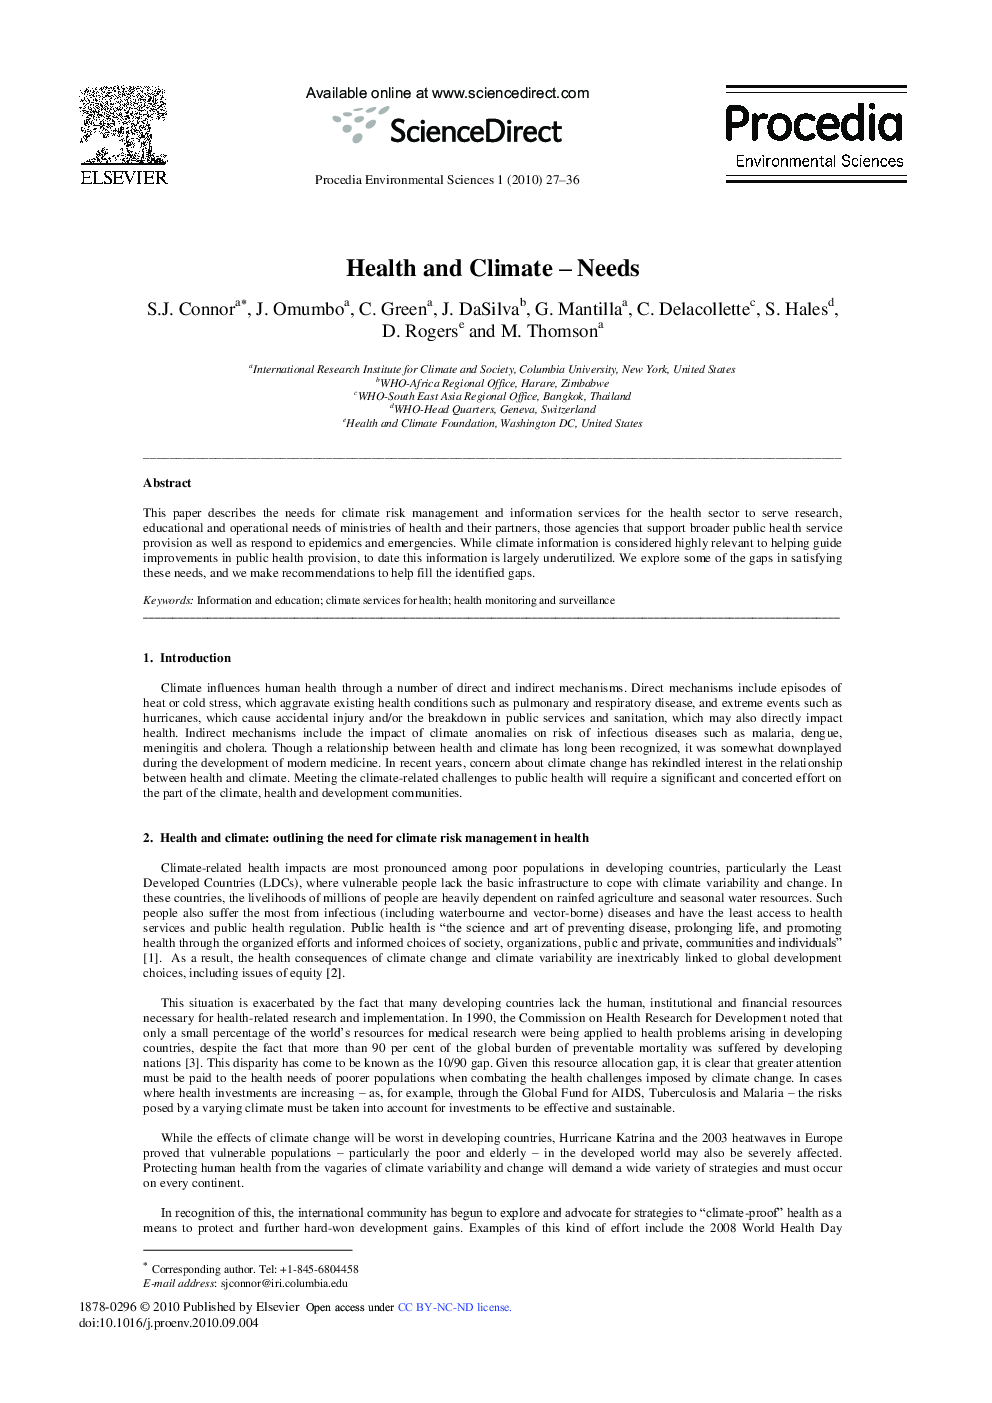 Health and Climate – Needs